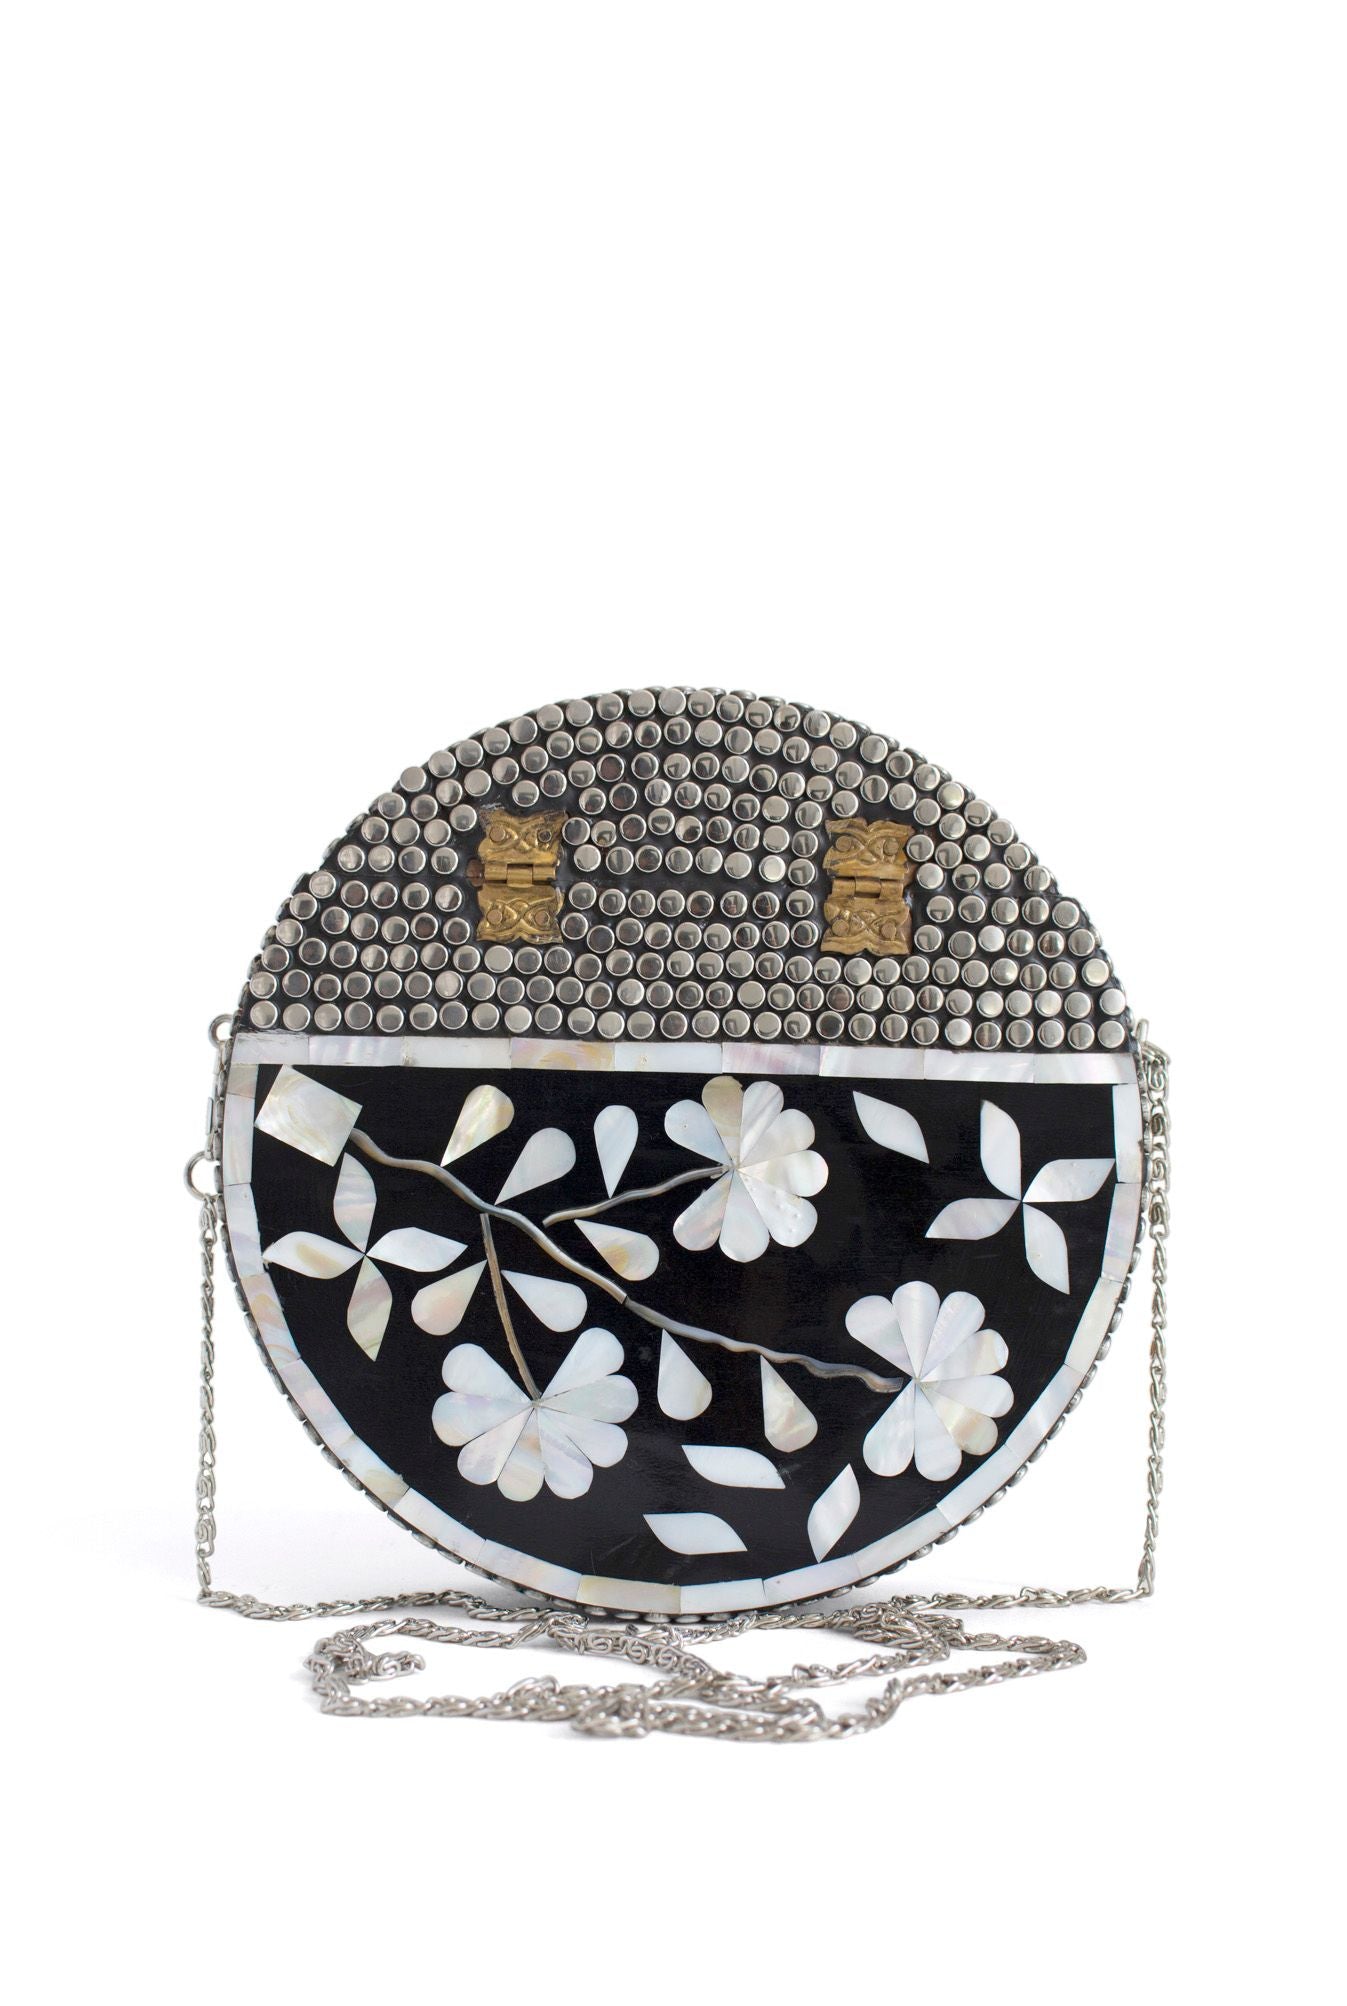 Vintage Silver Studded Clutch with Floral Nacre Accent